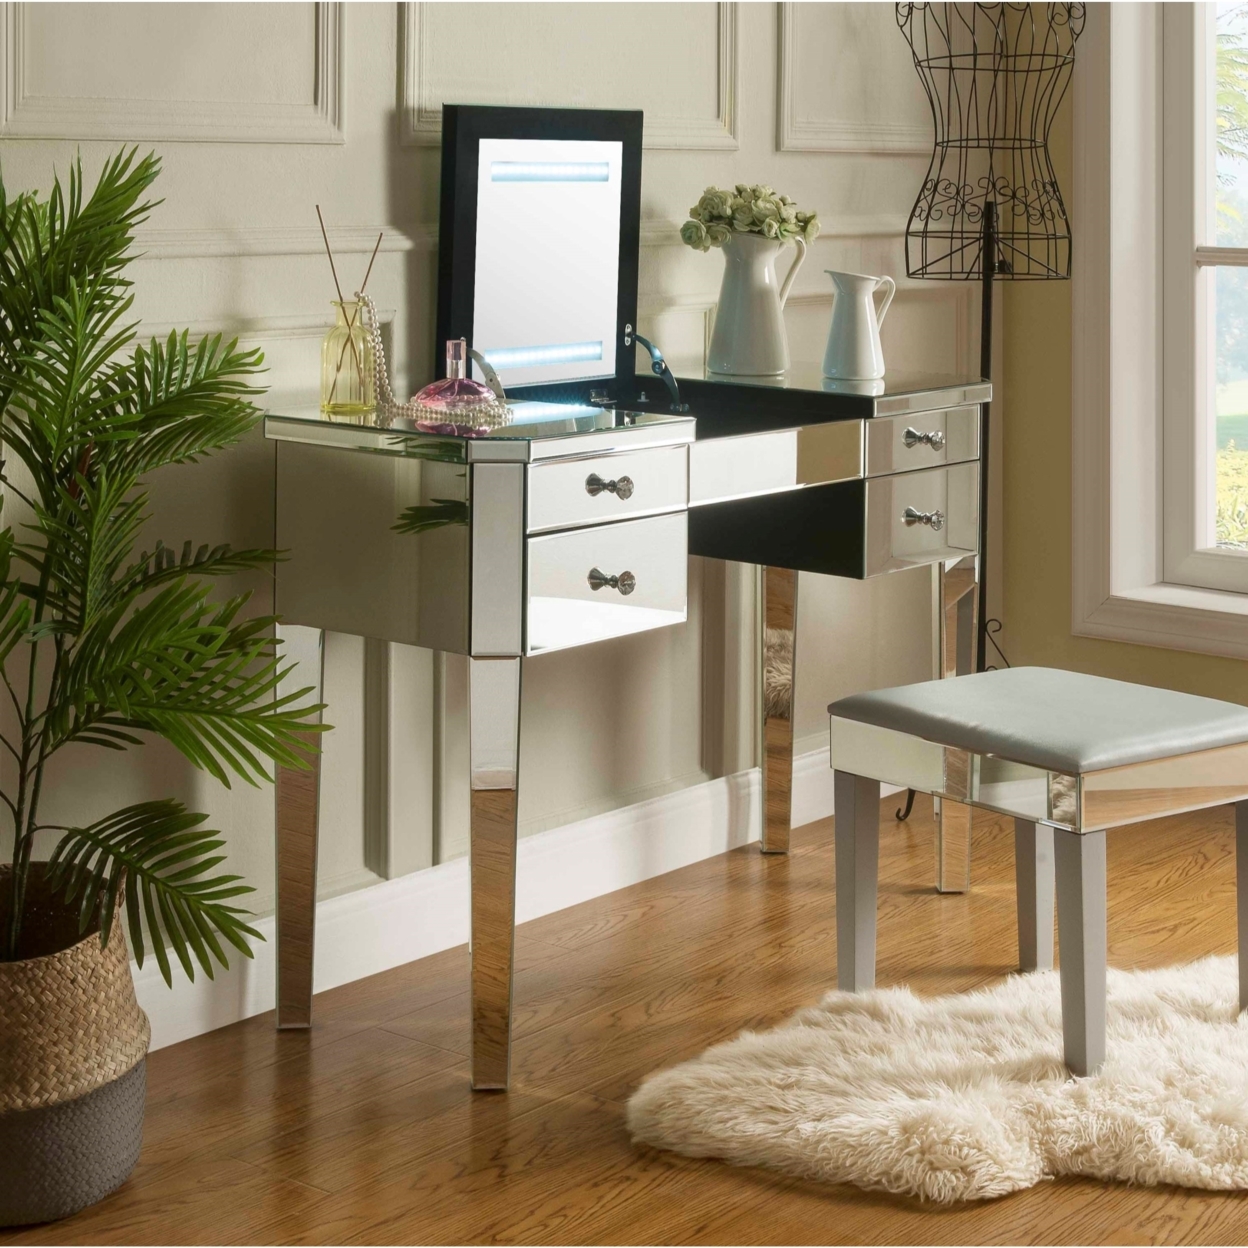 Cameron Mirrored Flip-Top Makeup Vanity Table-2 Or 4 Drawers-LED Option-Jewelry Holder-Bedroom - Led 4 Drawers